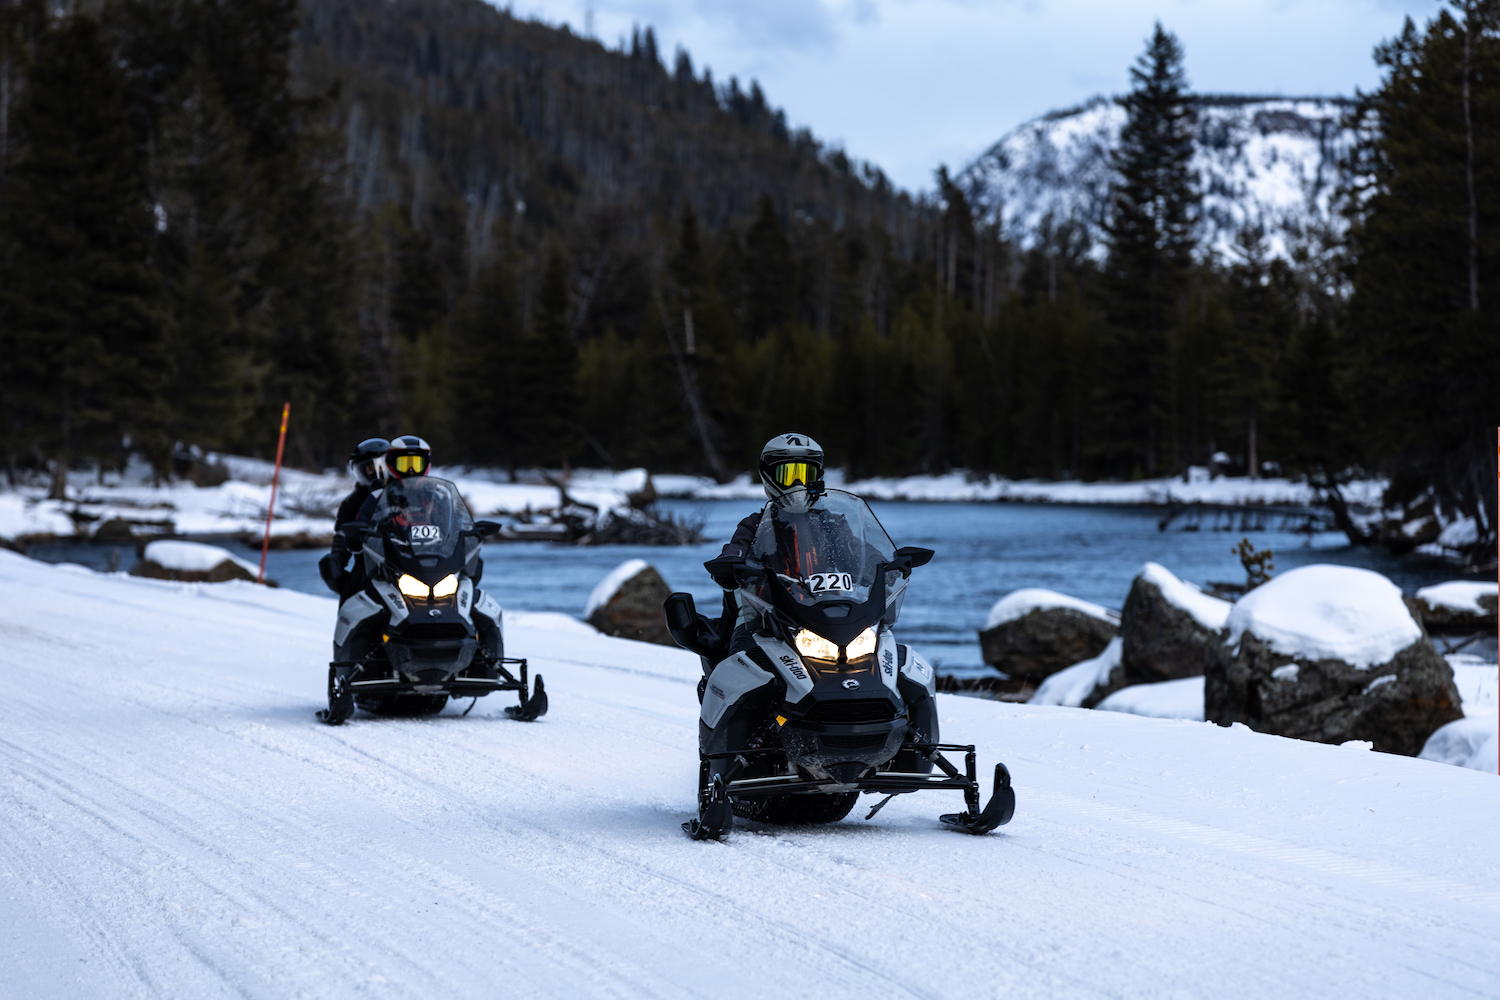 Why Ski-Doo is the only snowmobile permitted in Yellowstone